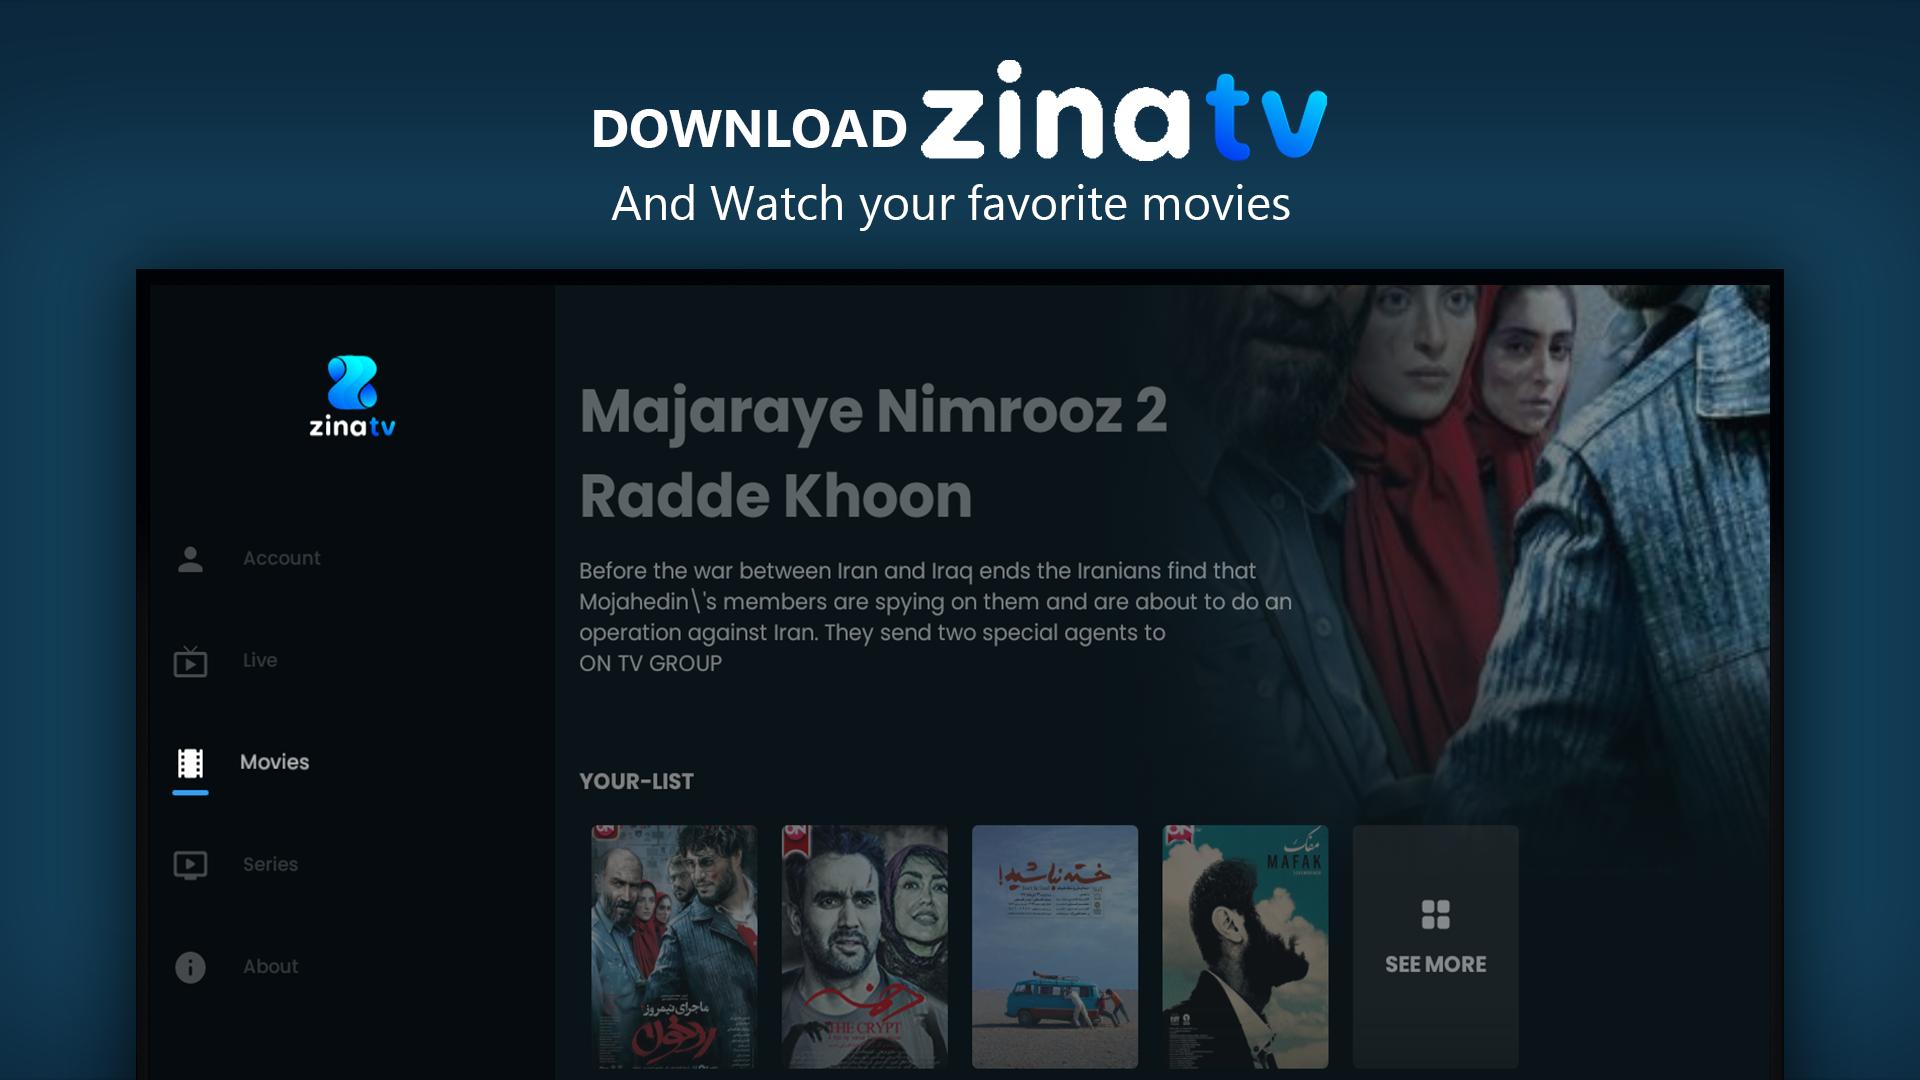 Zina TV for Android - APK Download